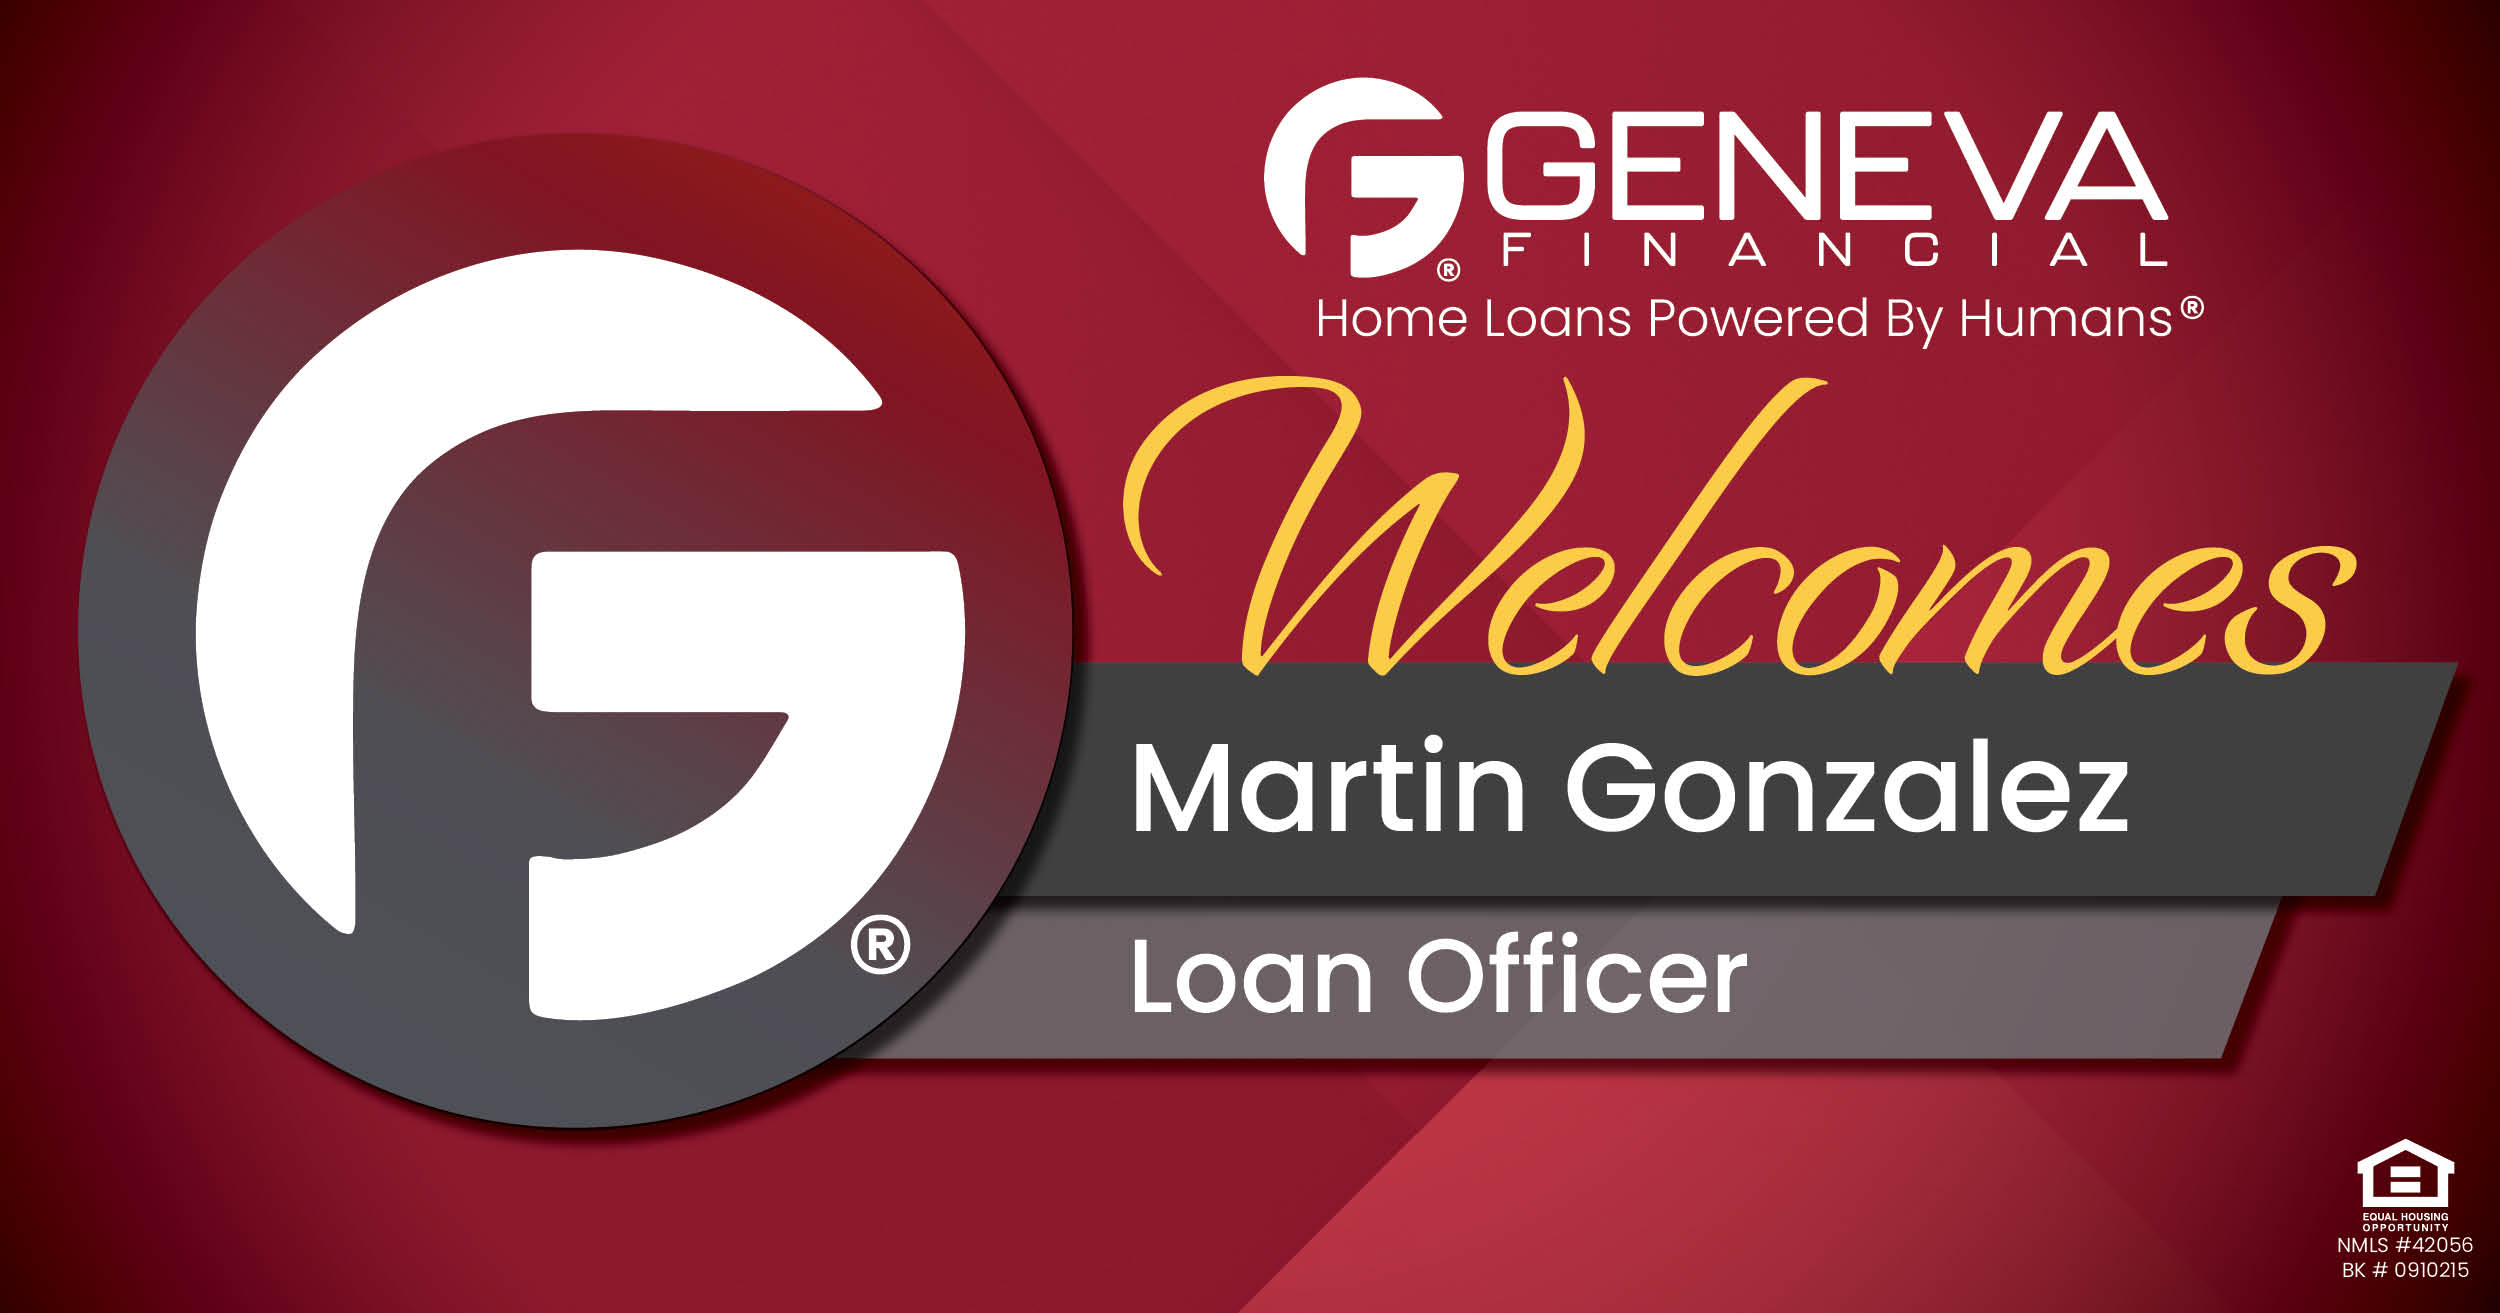 Geneva Financial Welcomes New Loan Officer Martin Gonzalez to Brooksville, Florida – Home Loans Powered by Humans®.